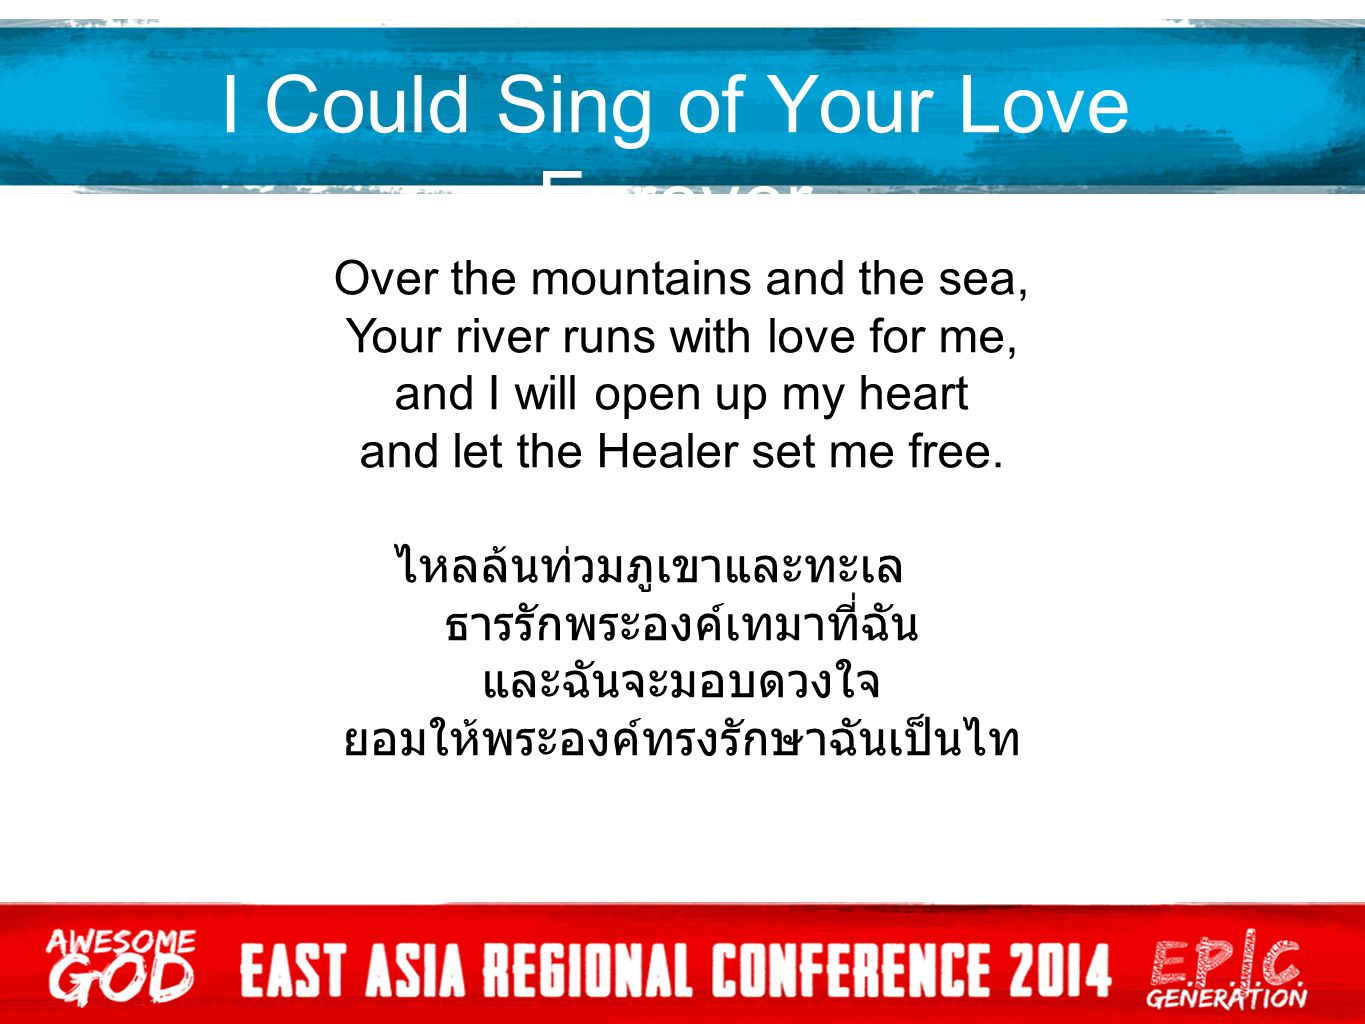 I Could Sing of Your Love Forever